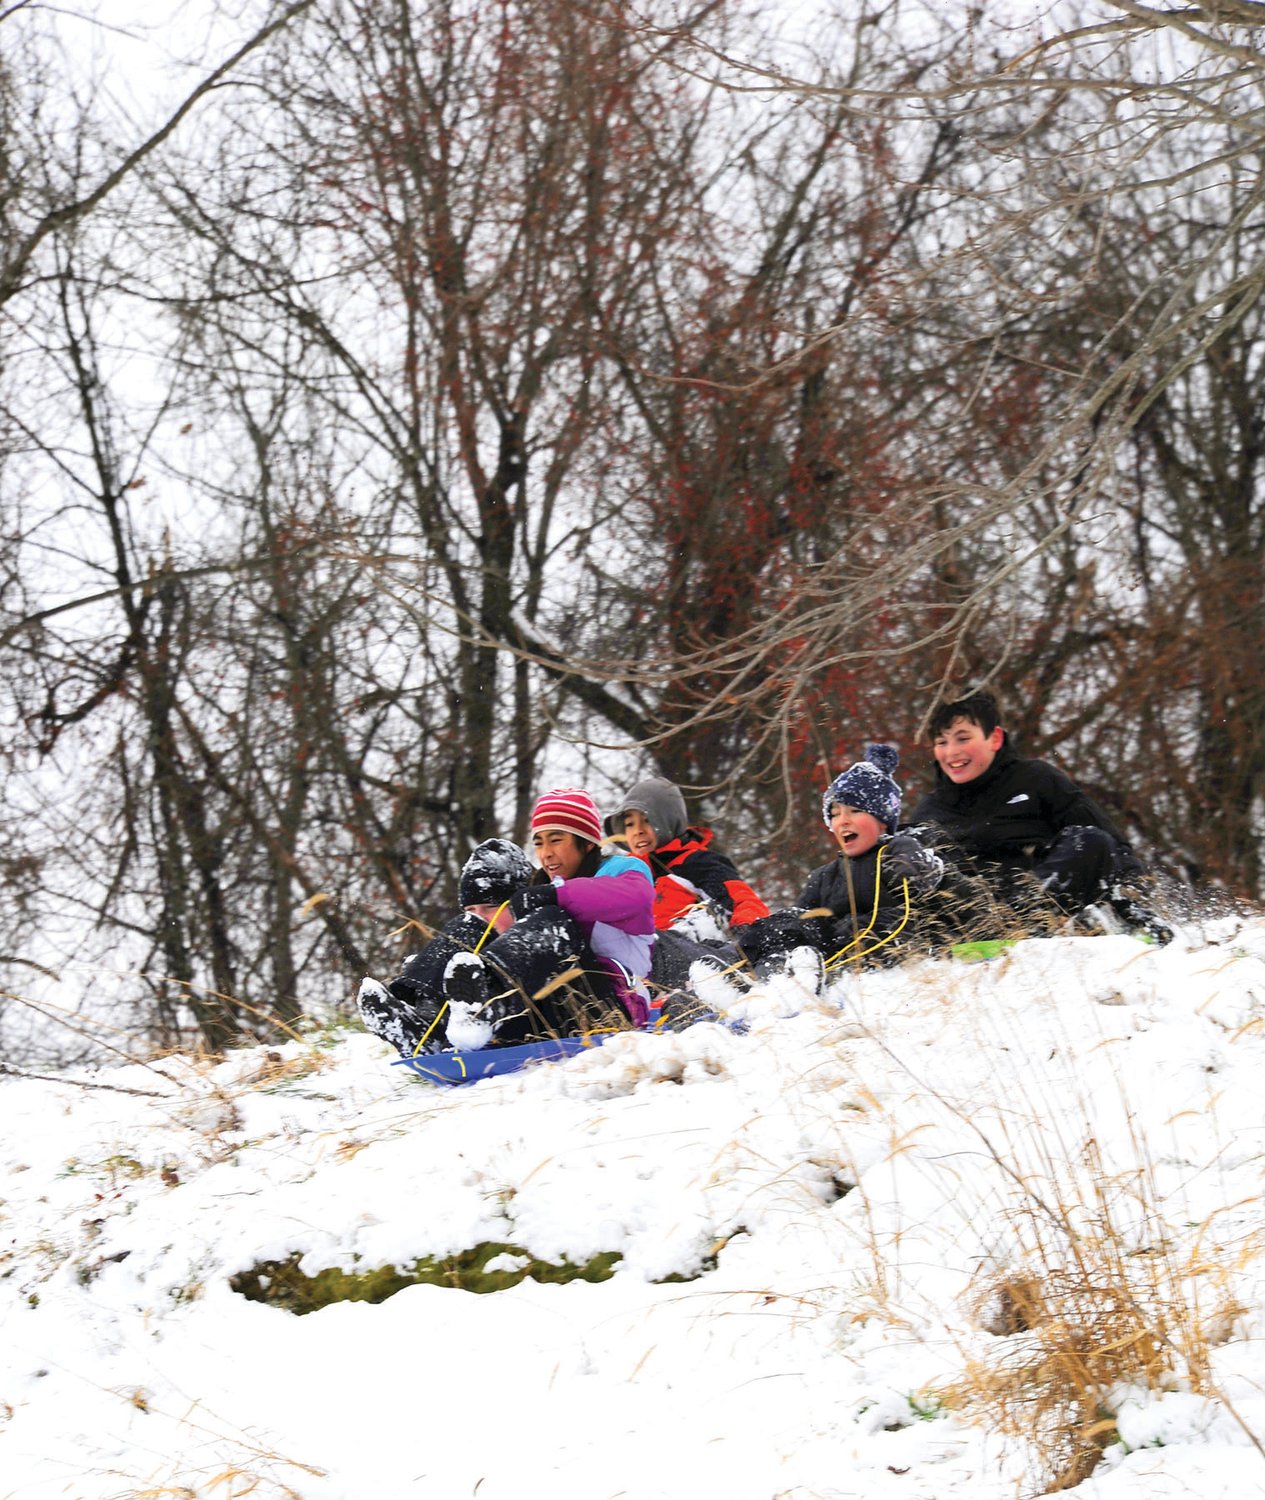 Sledders enjoy the first measurable snow of winter at Magill’s Hill in Solebury Township.